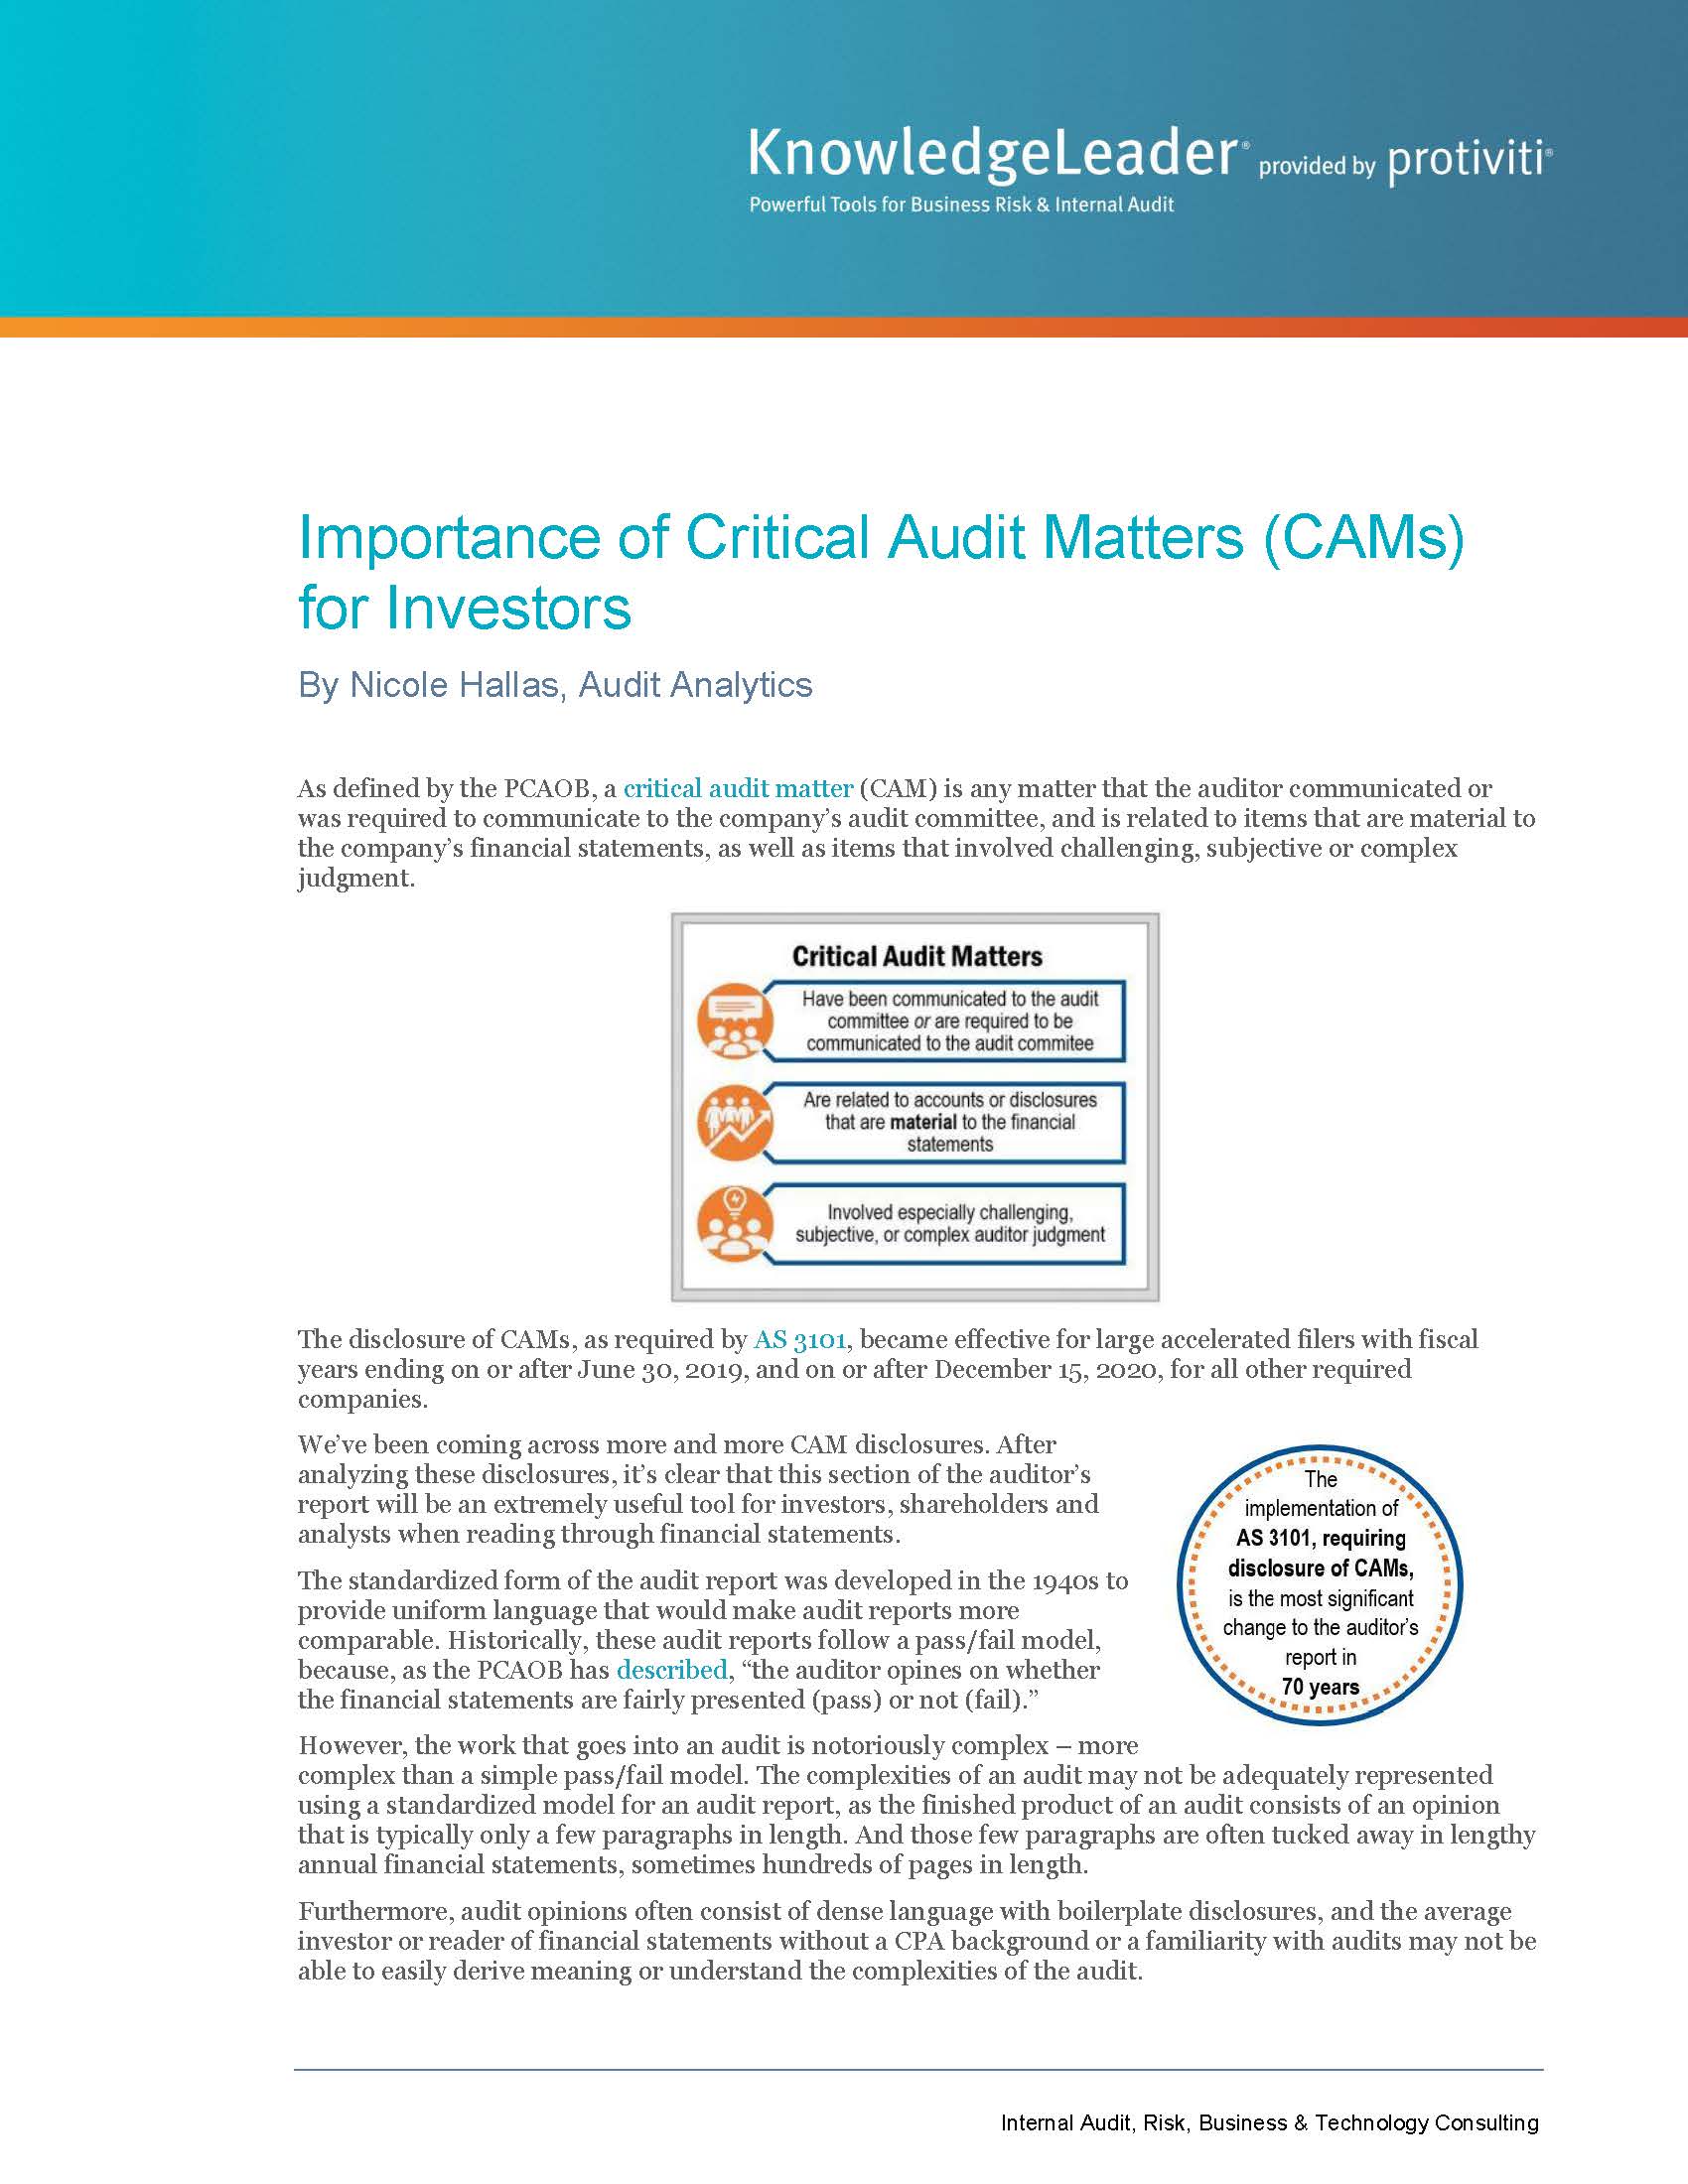 Screenshot of the first page of Importance of Critical Audit Matters (CAMs) for Investors